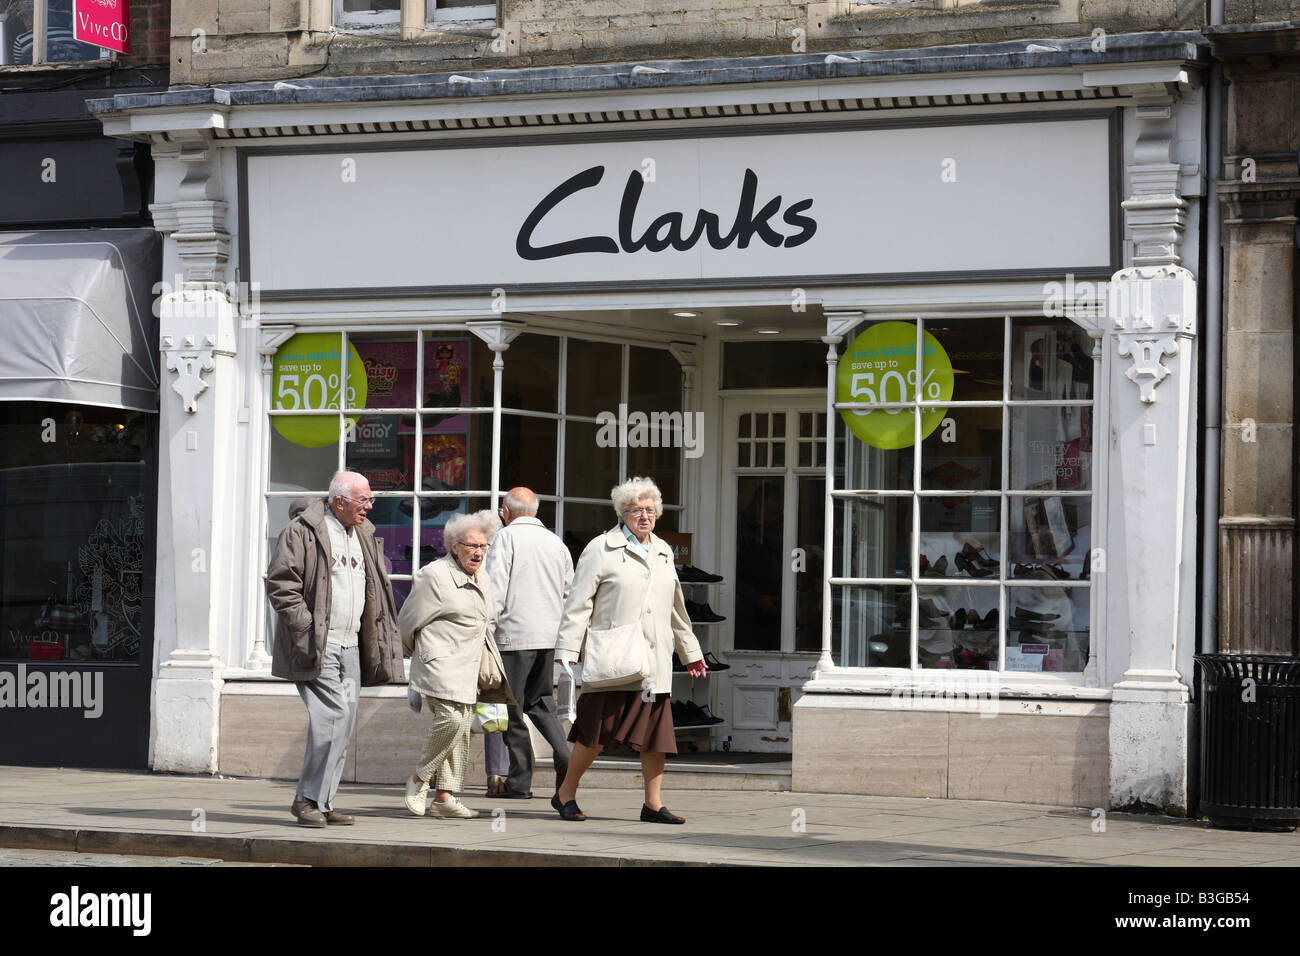 lowry clarks outlet